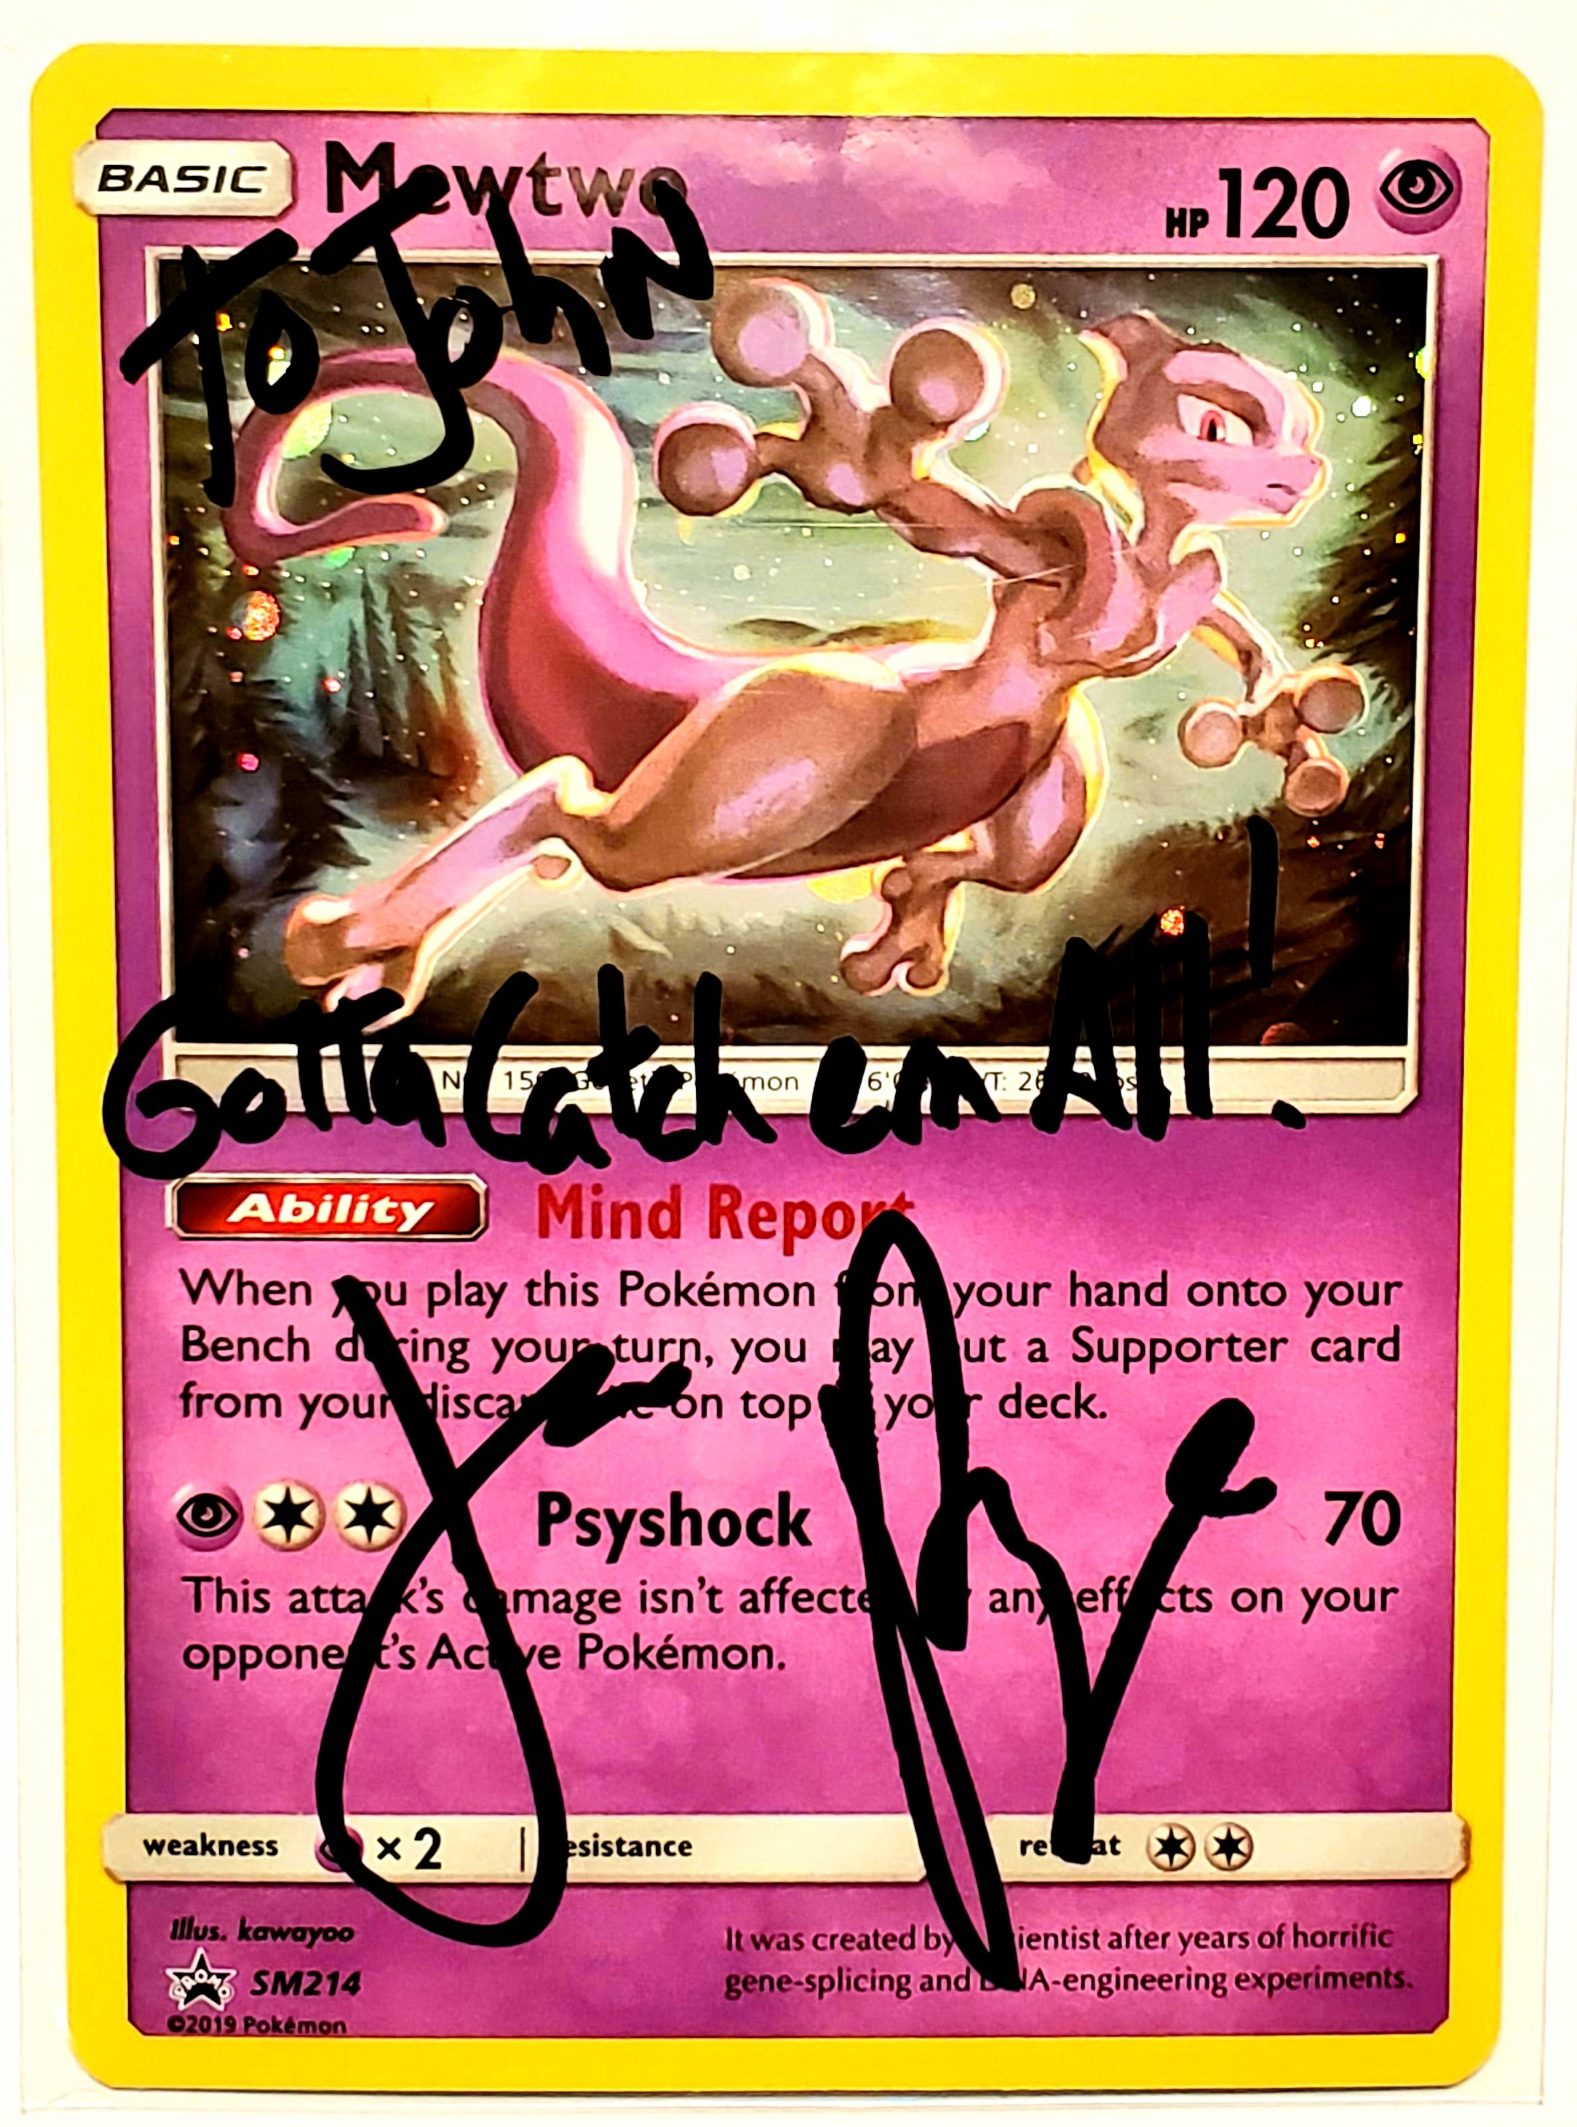 Autographed Mewtwo Holographic Card Limited Supply